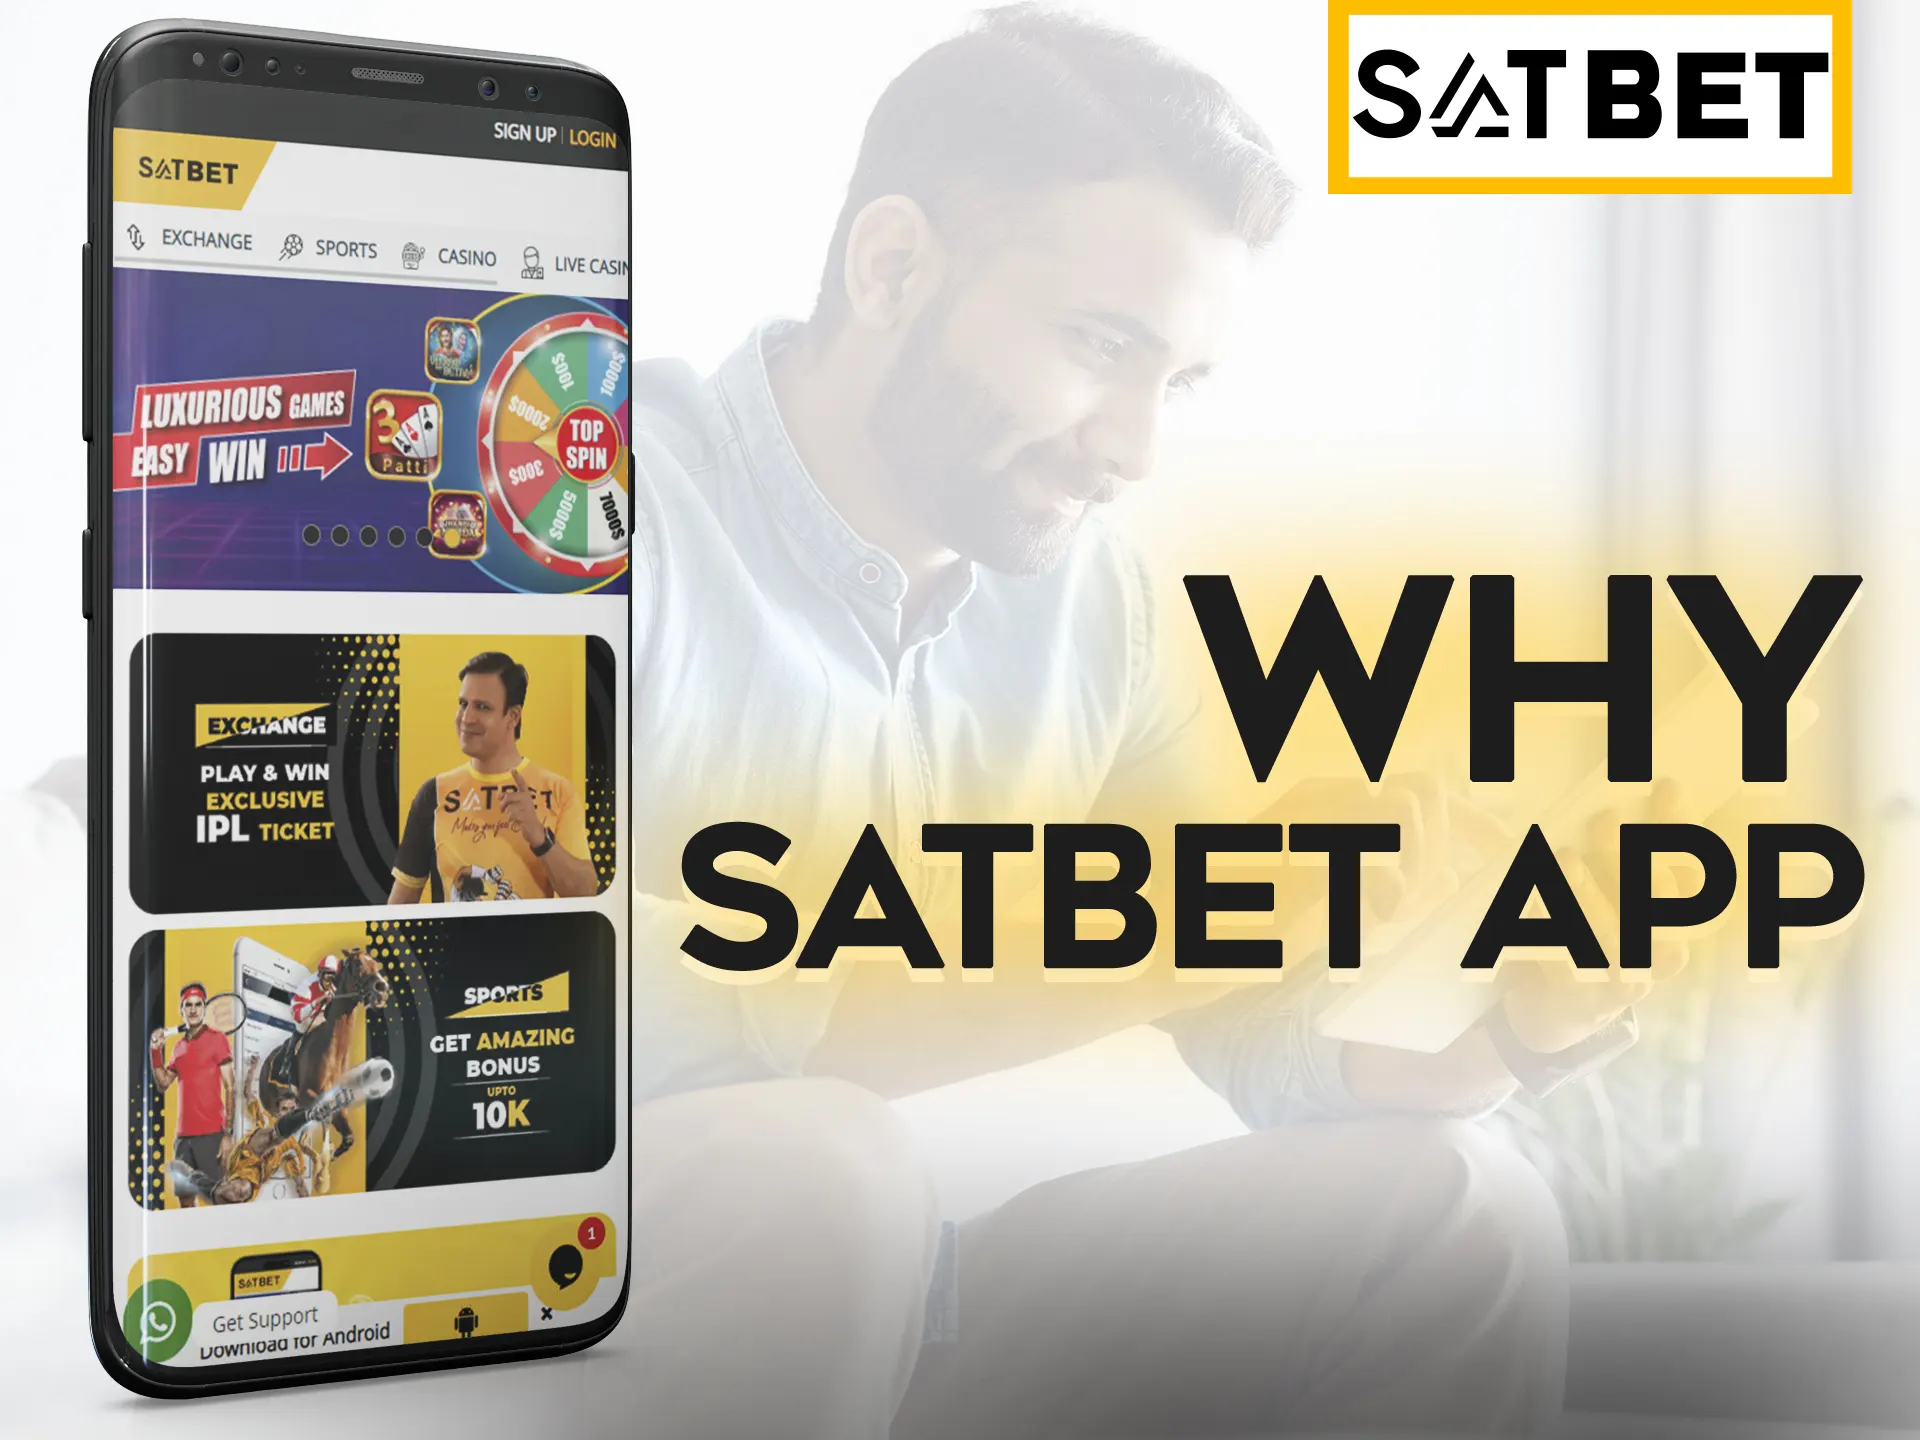 Choose Satbet app for betting and playing casino games.